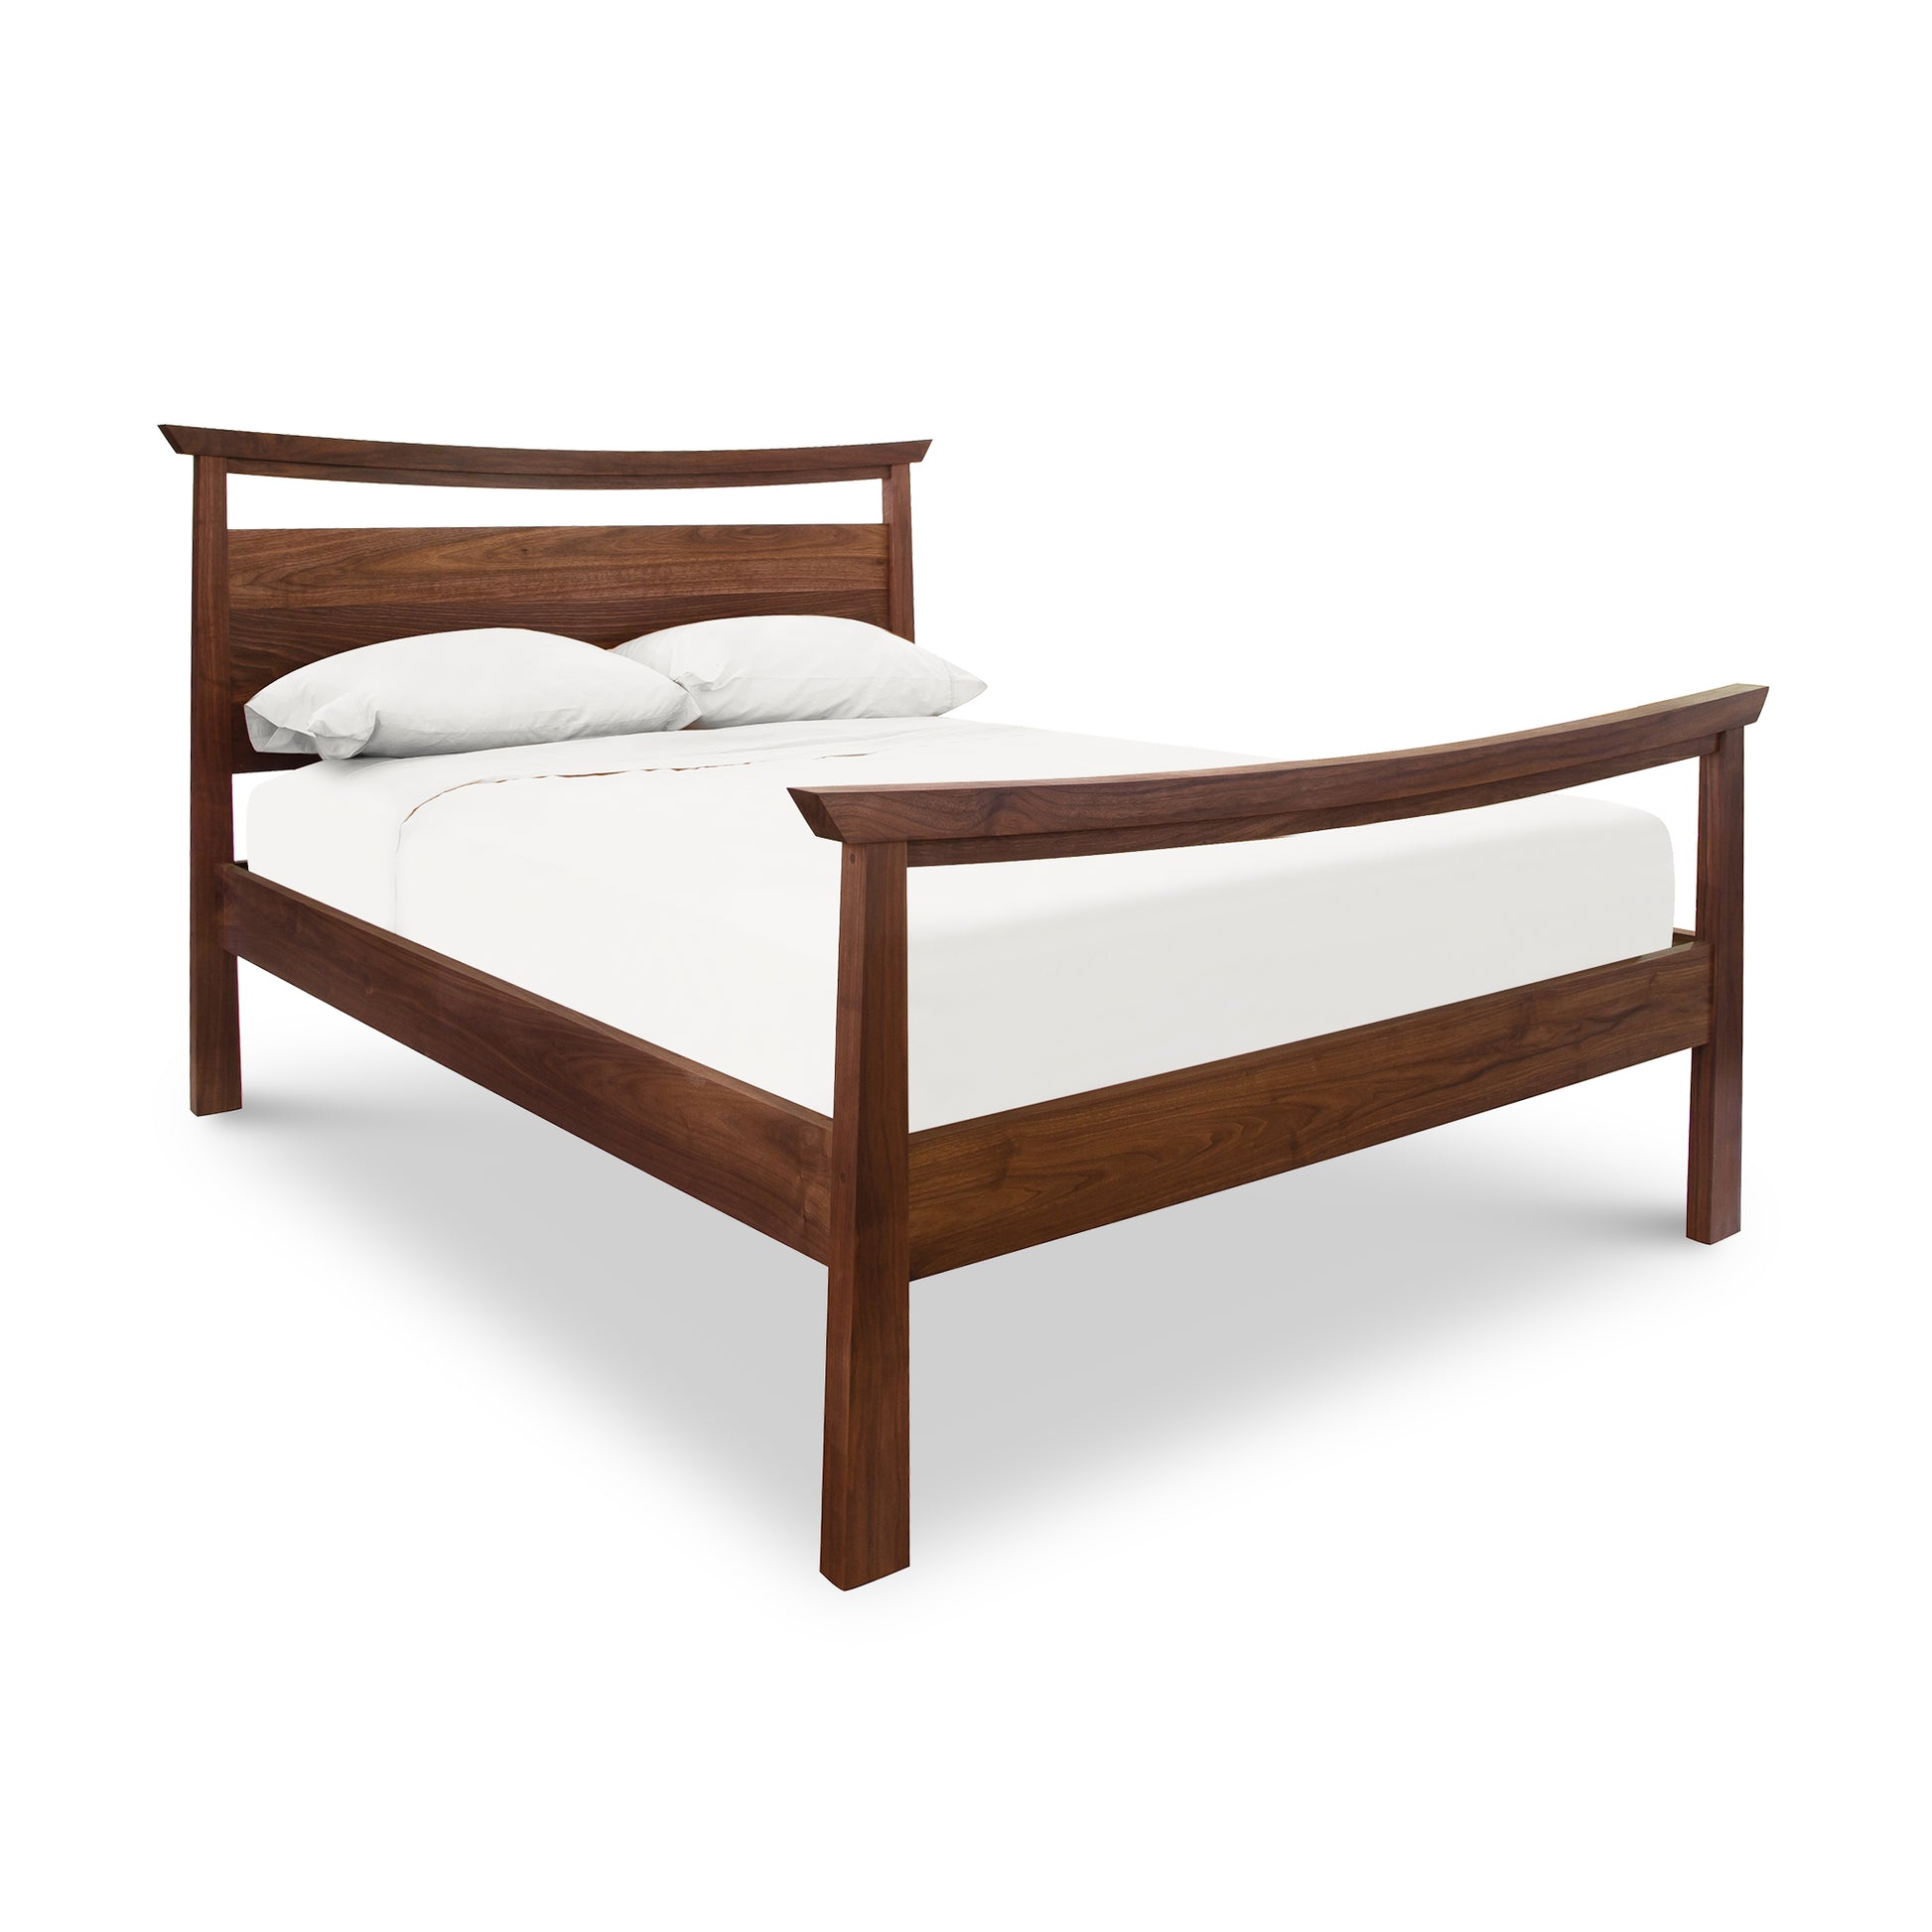 A natural Cherry Moon Pagoda bed frame from Maple Corner Woodworks with a dark walnut finish, featuring a curved headboard and a white mattress. The bed is set against a white background, emphasizing its clean and elegant design.